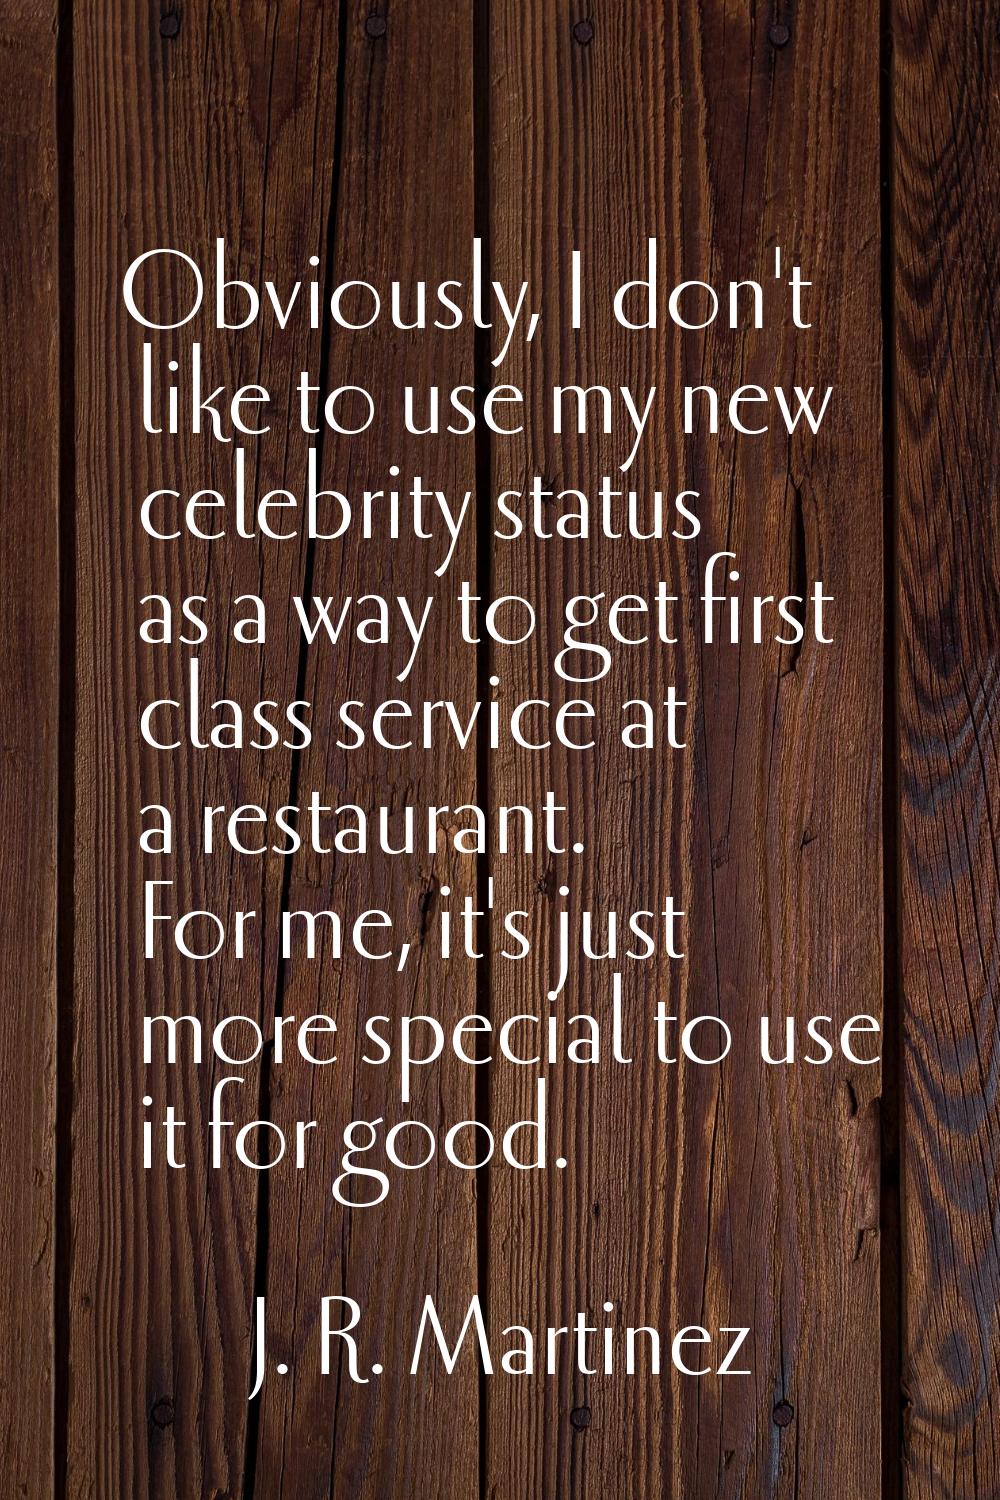 Obviously, I don't like to use my new celebrity status as a way to get first class service at a res